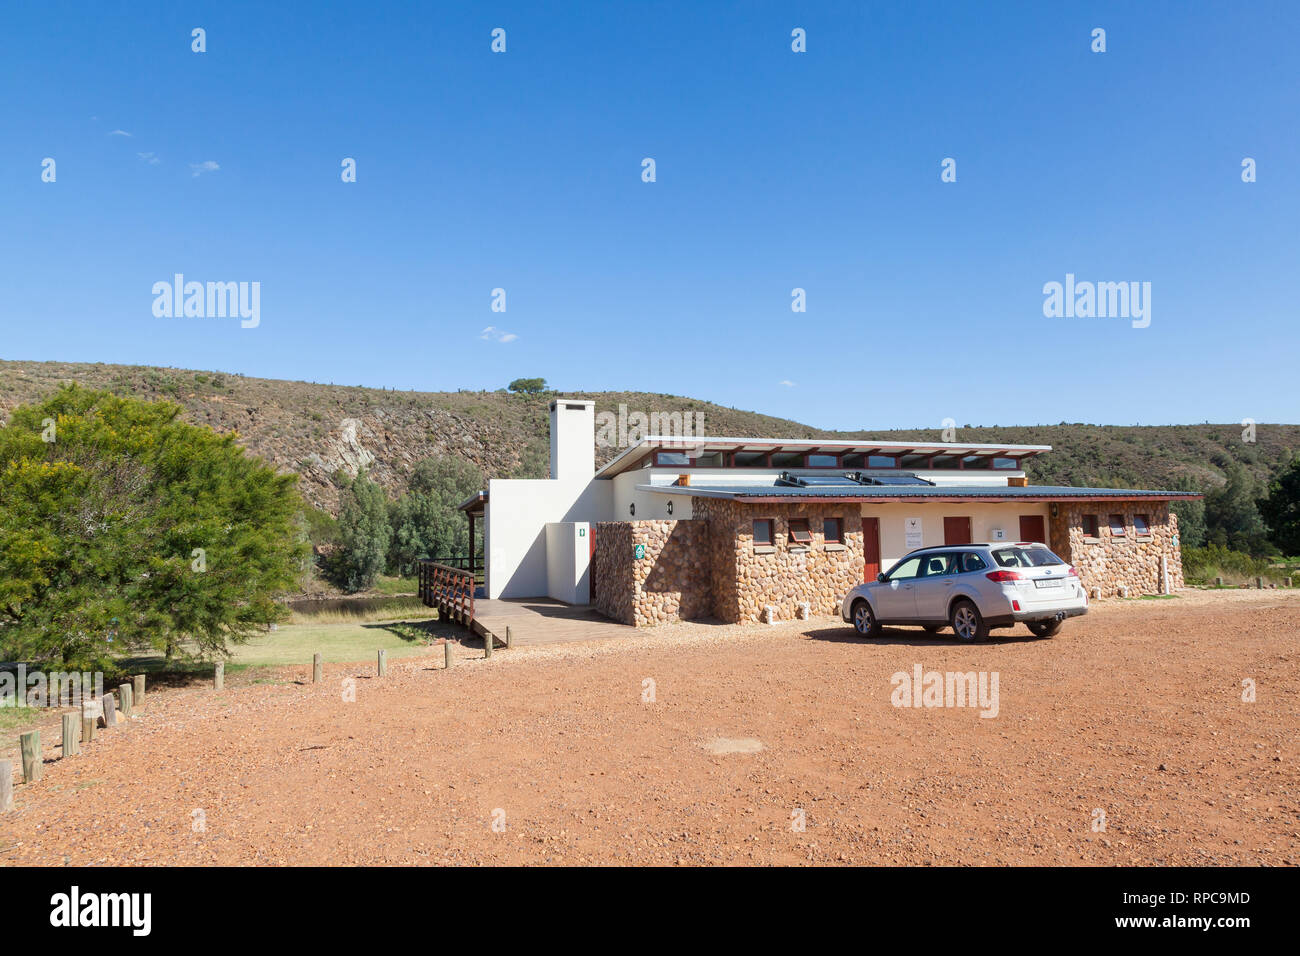 The facilities and picnic site on the Breede River in the Bontebok National Park, Swellendam, Western Cape, South Africa Stock Photo